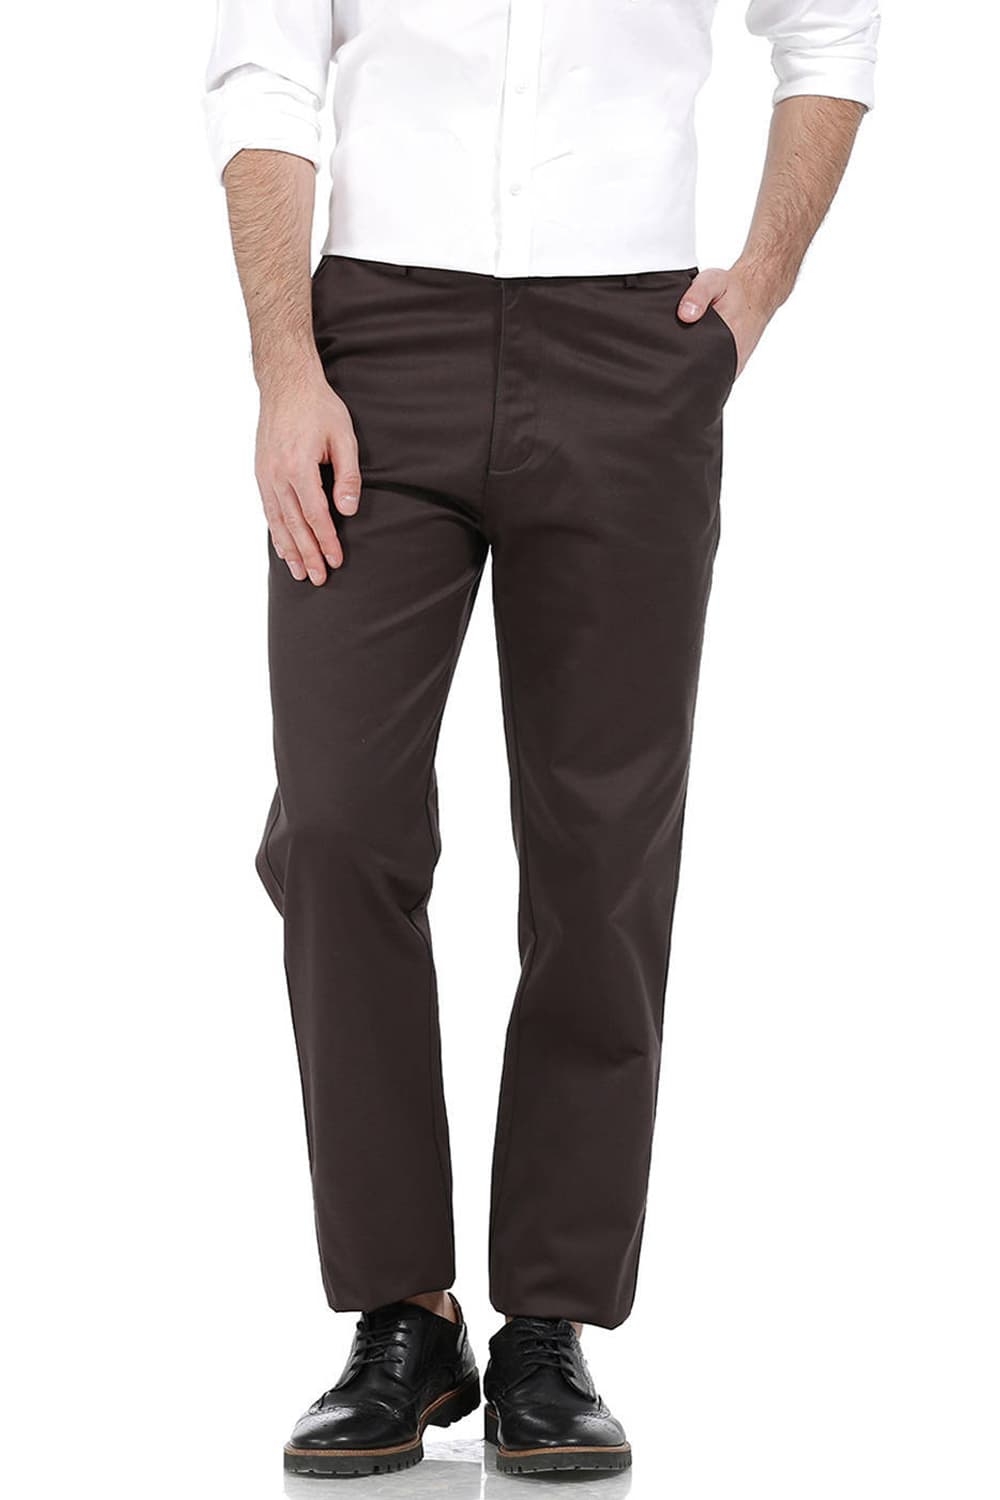 Basics | Basics Comfort Fit Mid Brown Satin Weave Poly Cotton Trousers